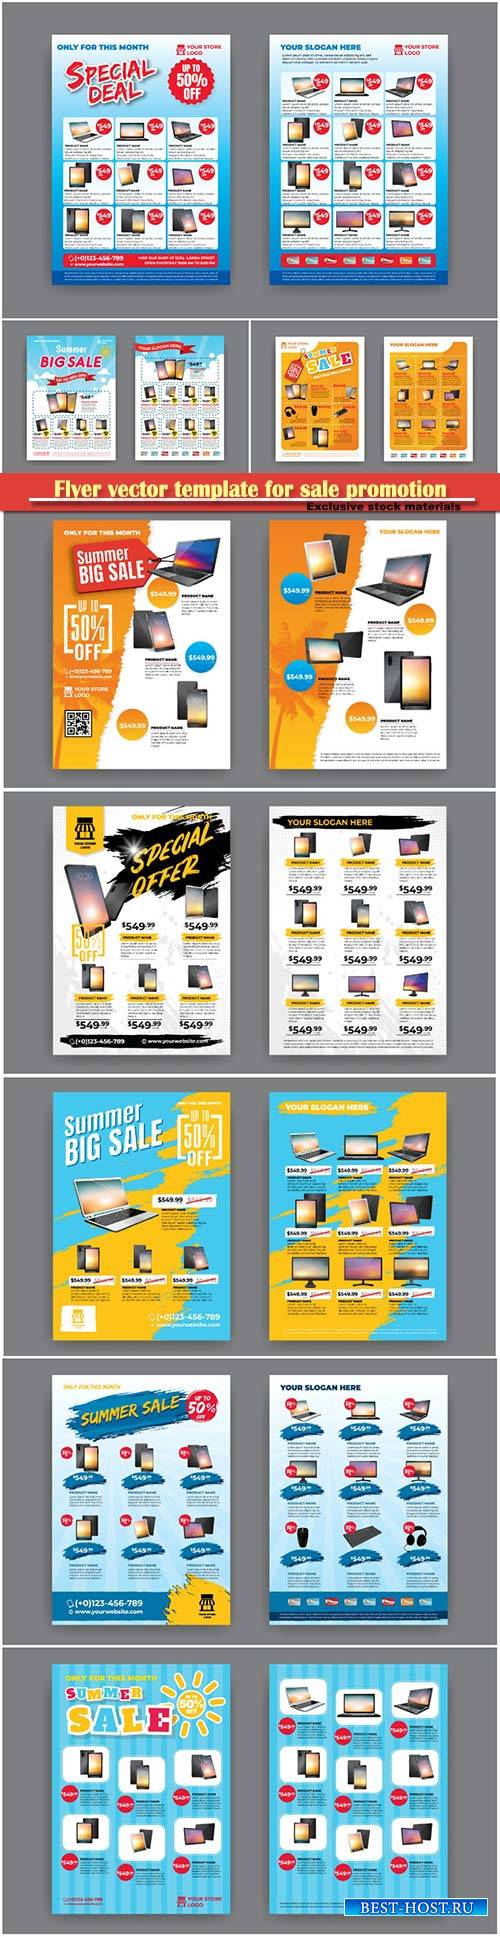 Flyer vector template for sale promotion